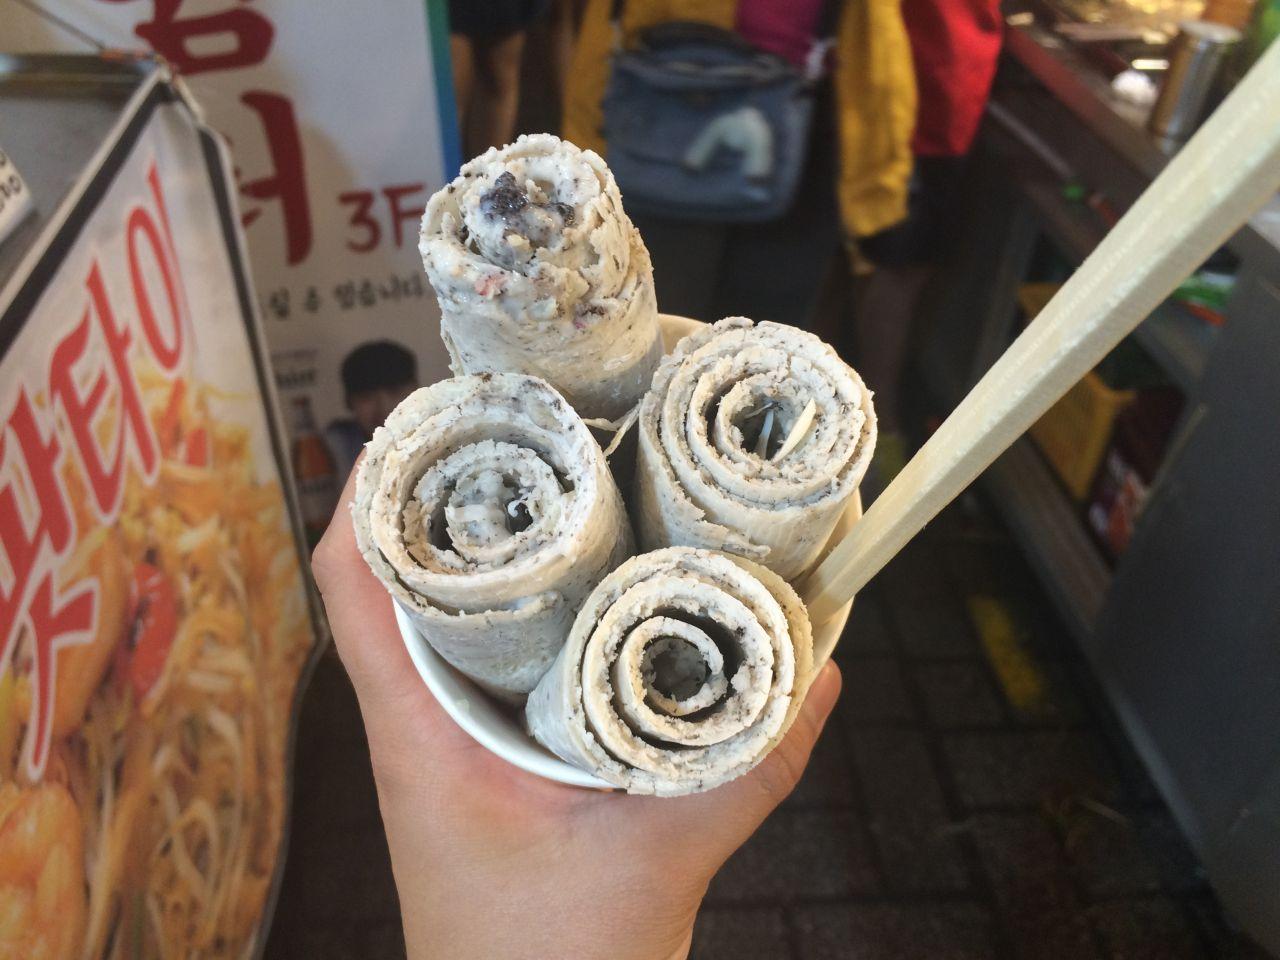 Bupyeong Gangtong Market - a selection of Korean comfort food including ice cream, served on paper plate.